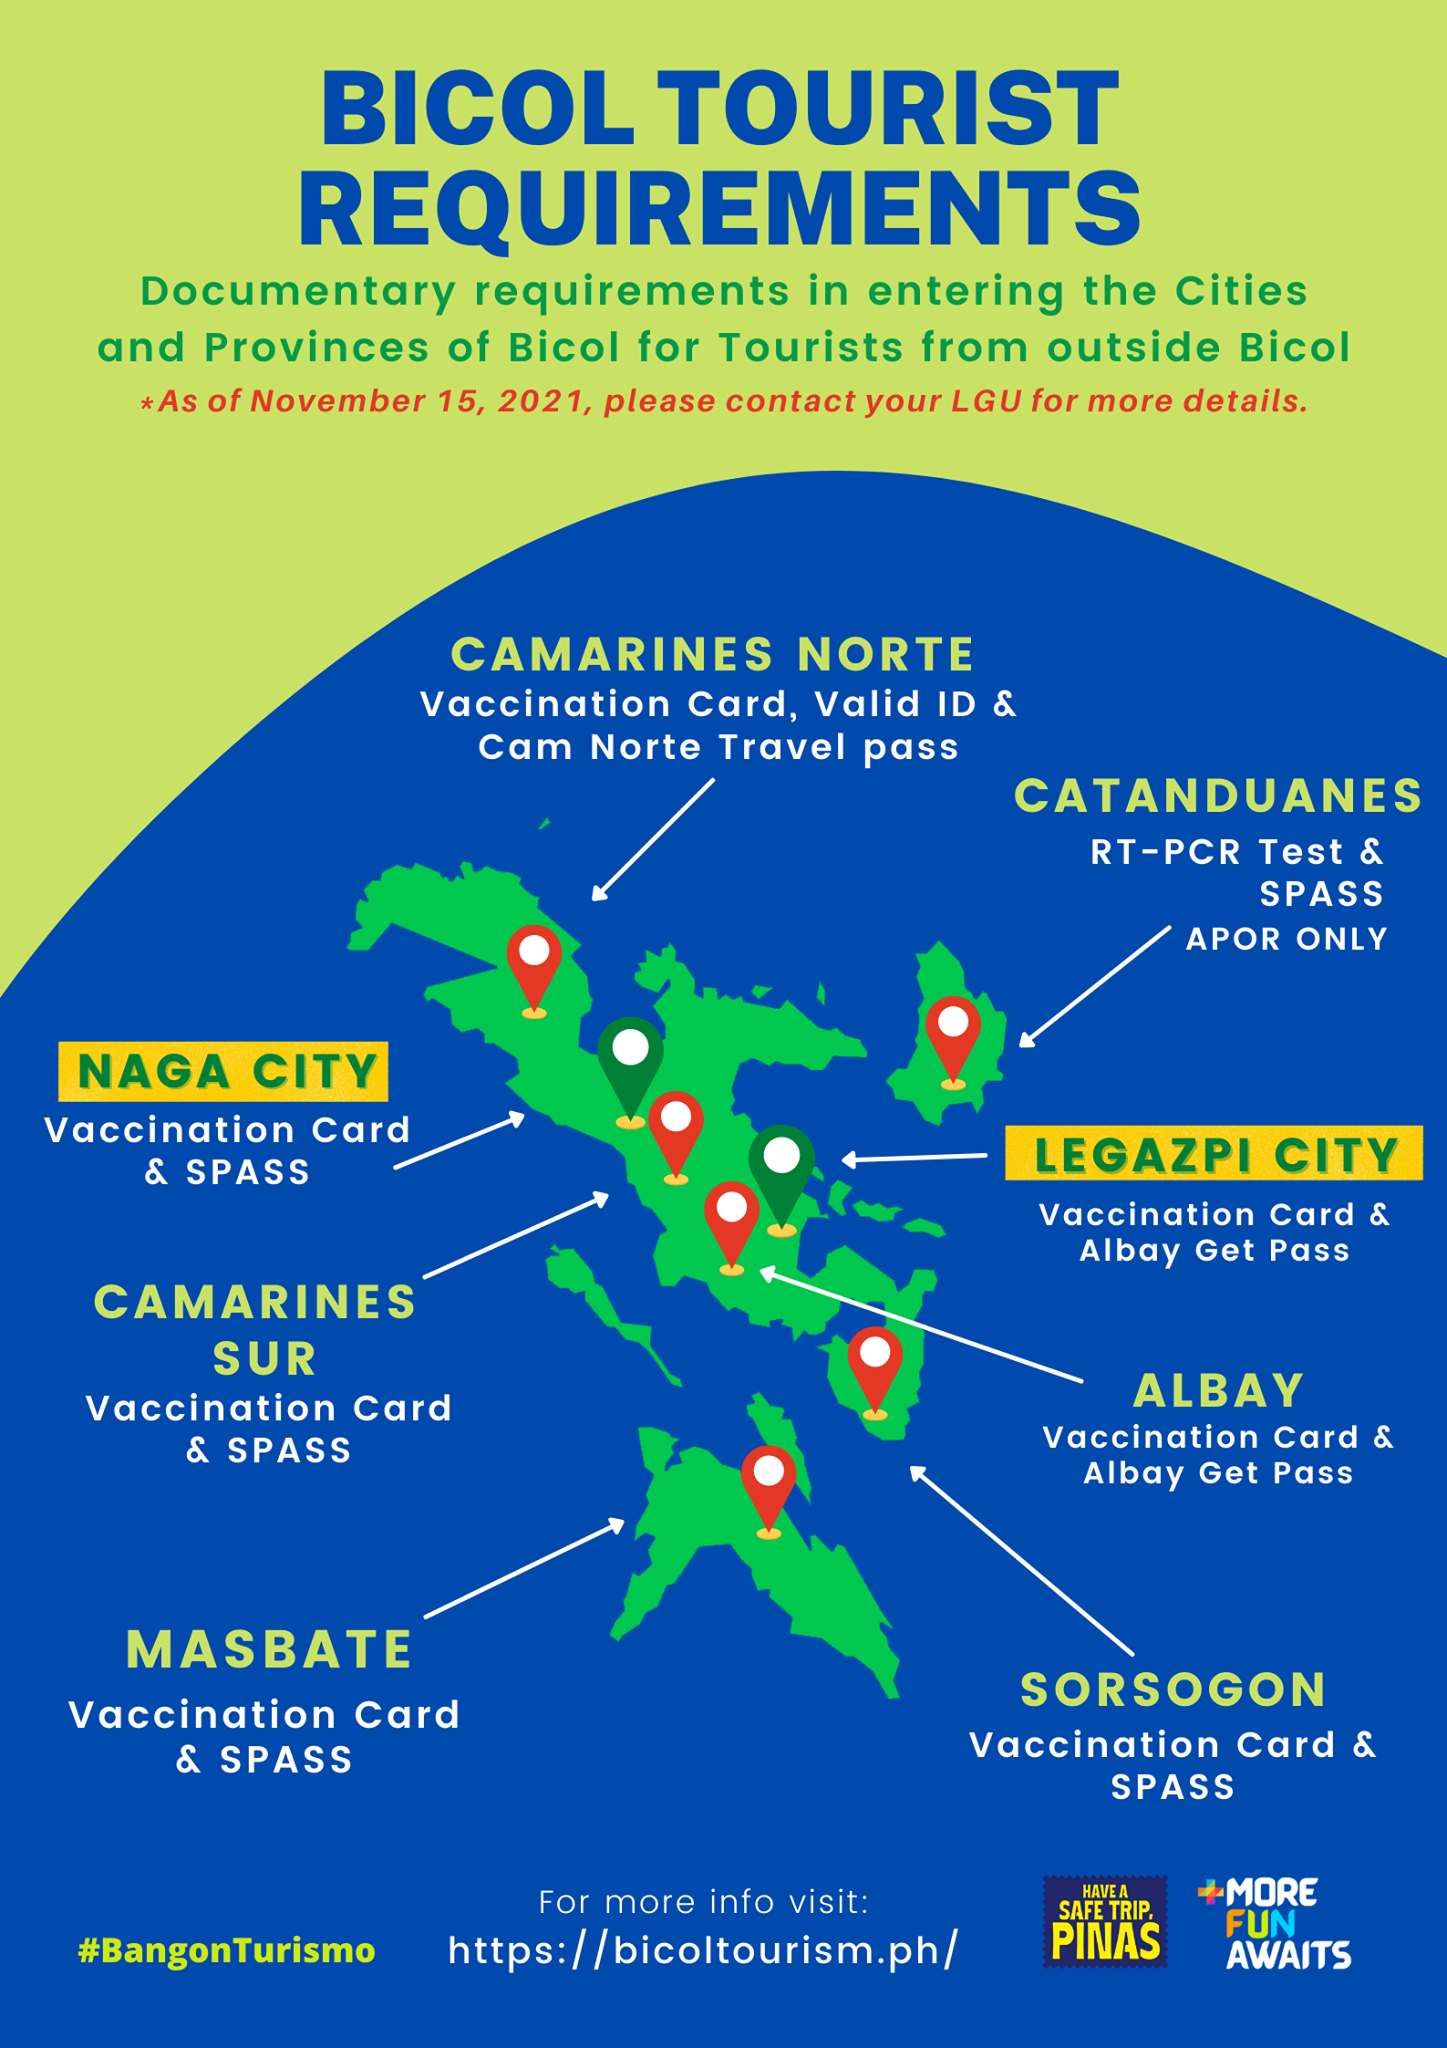 Travel requirements of the Bicol Region